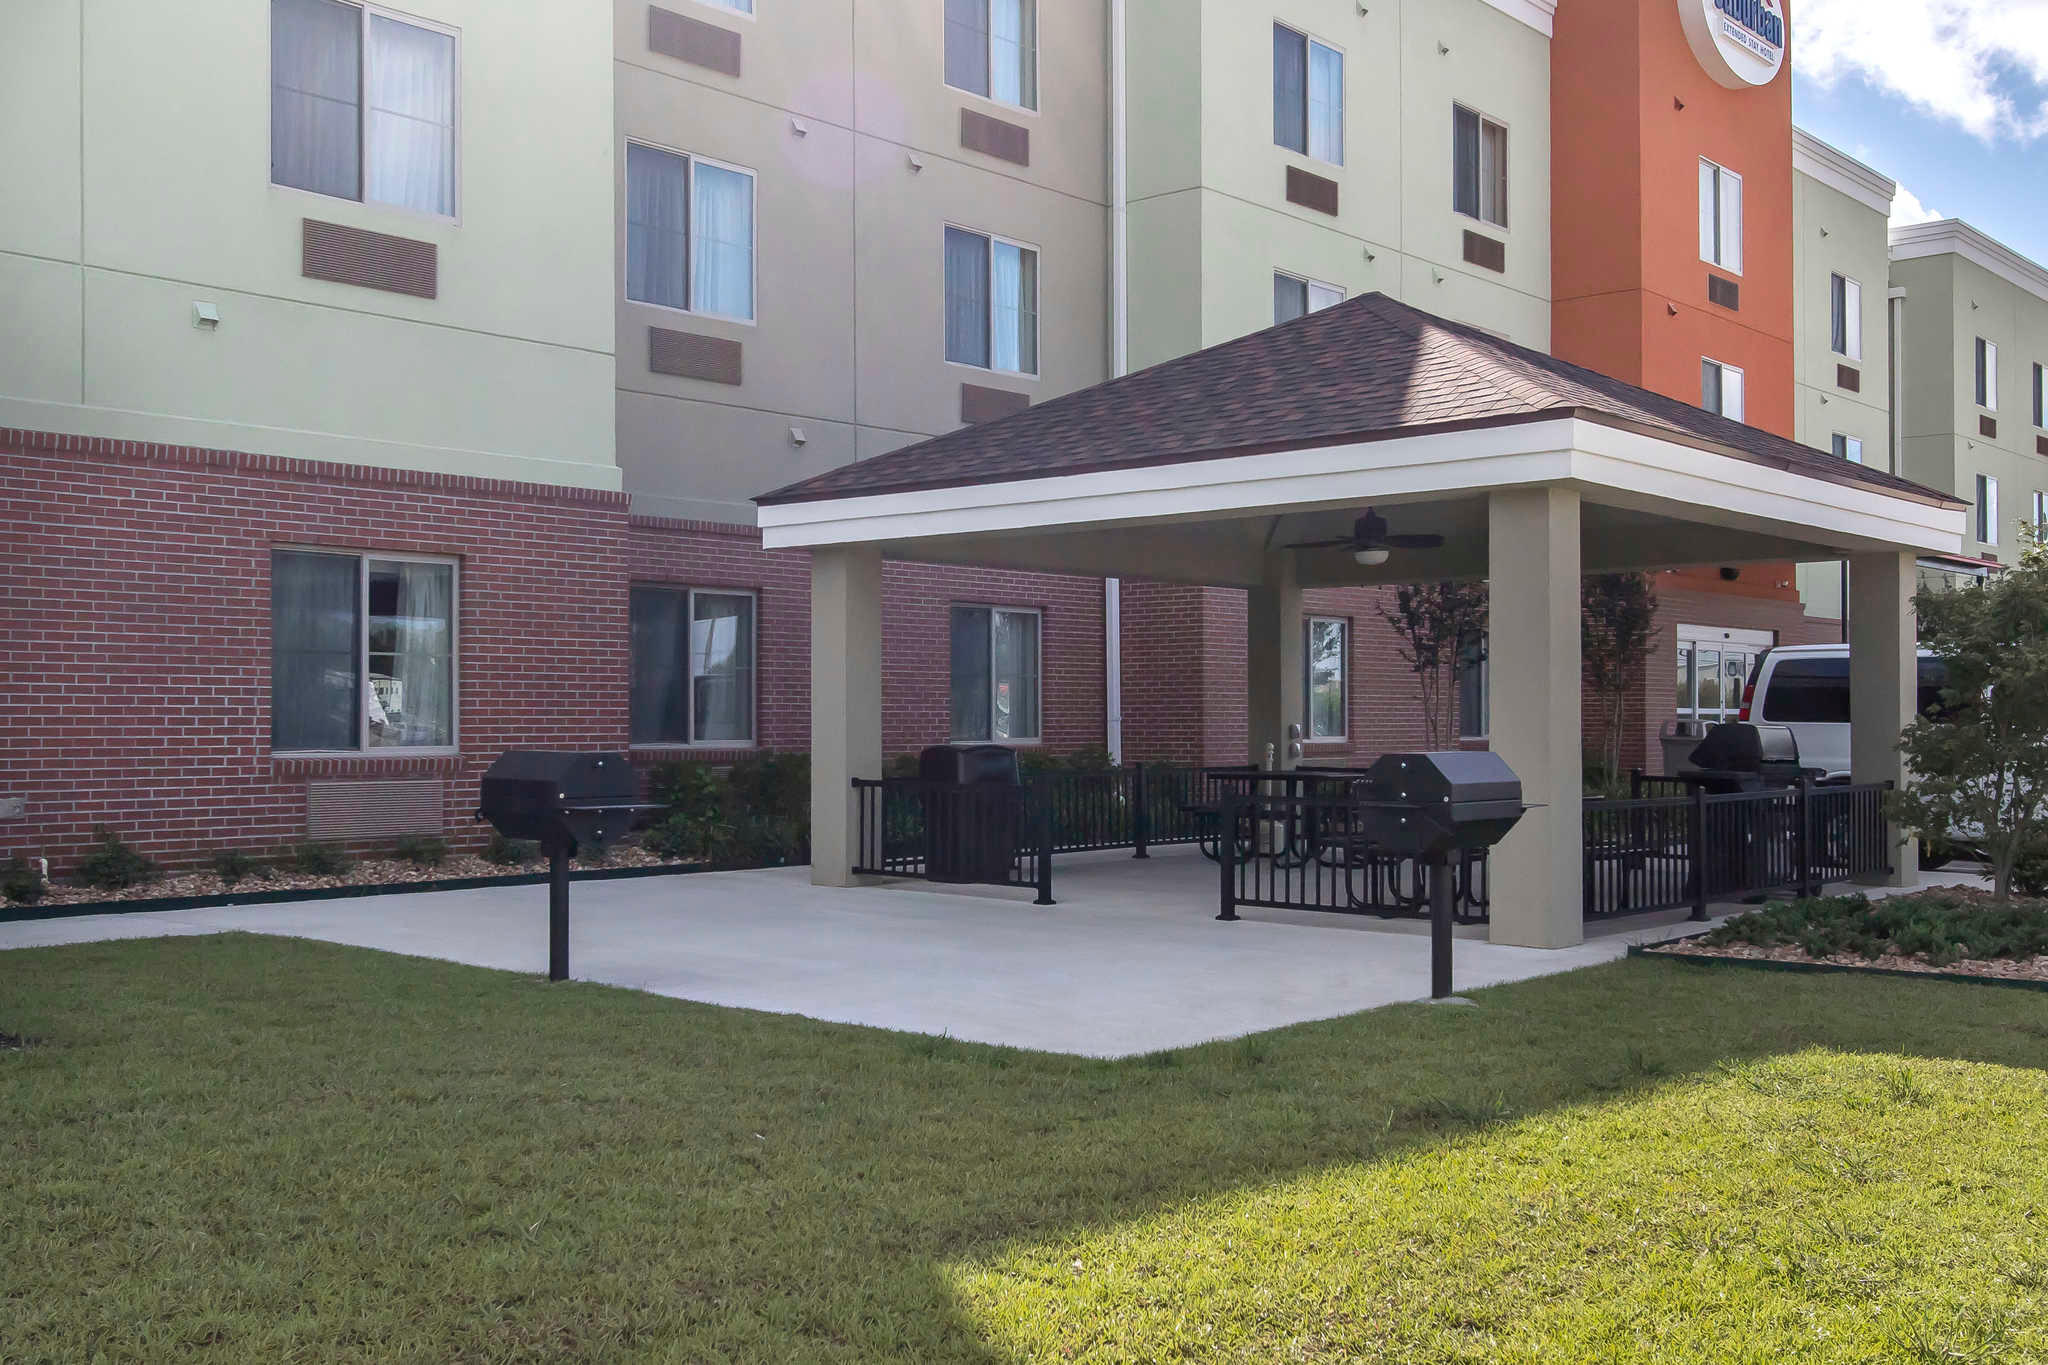 Suburban Extended Stay Hotel Coupons near me in Donaldsonville, LA 70346 | 8coupons